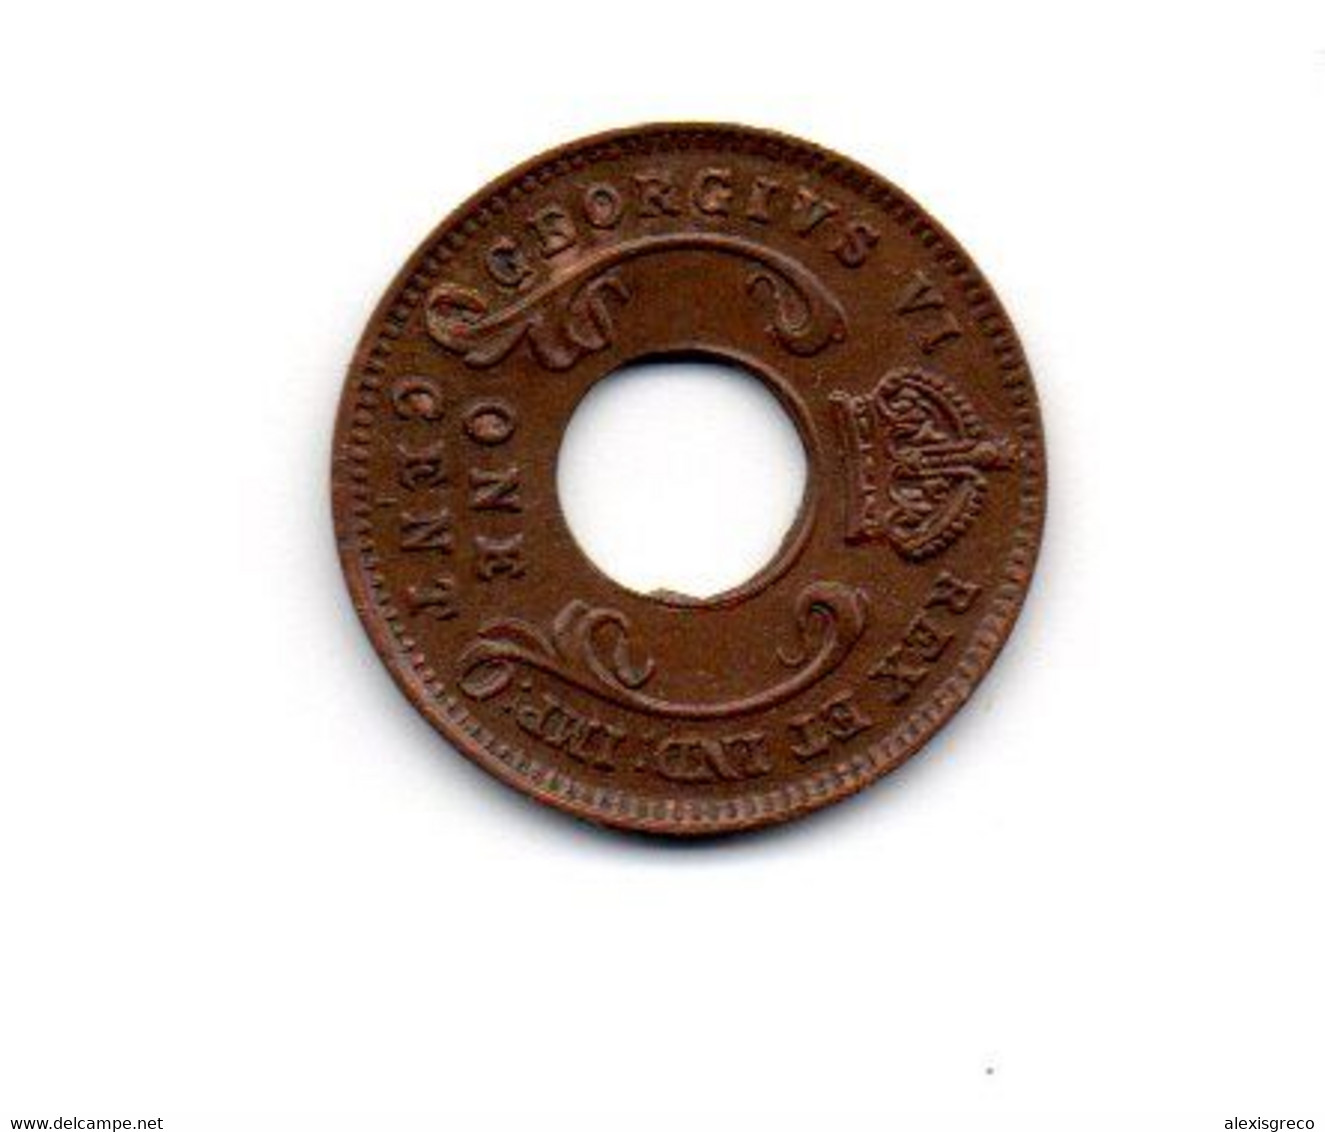 BRITISH EAST AFRICA USED ONE CENT COIN BRONZE Of 1942 'I' - East Africa & Uganda Protectorates